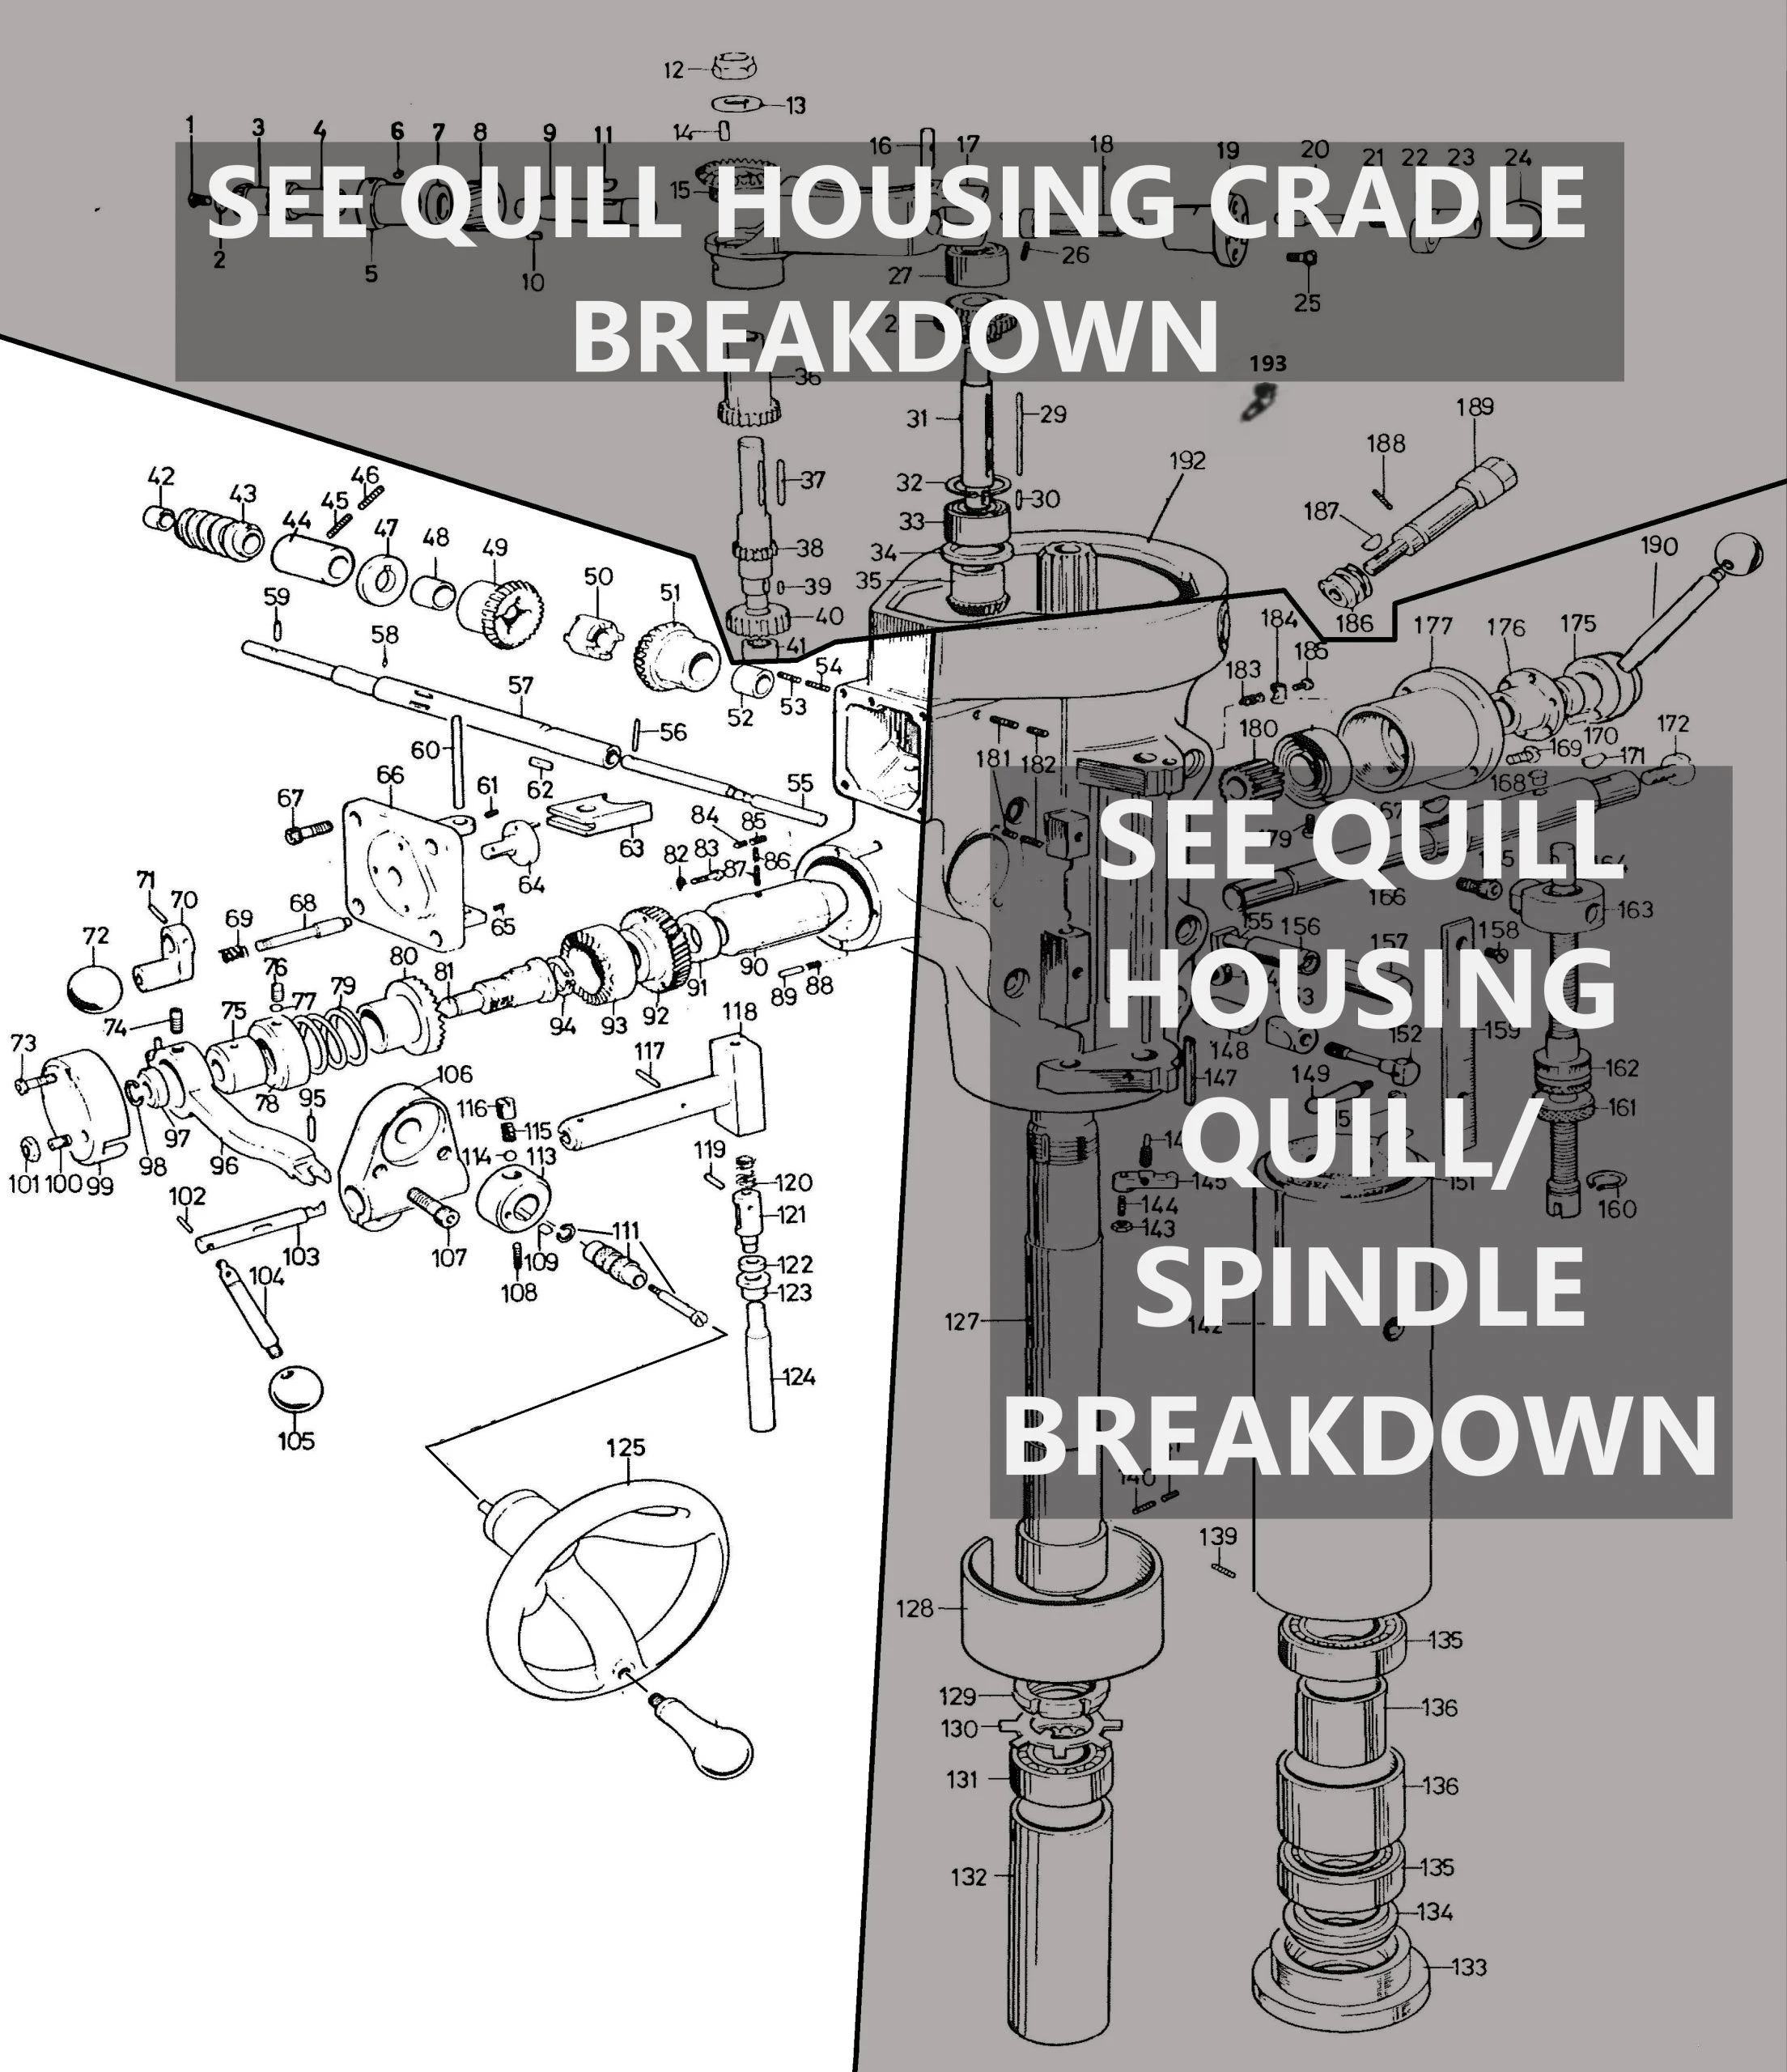 Quill Housing – Downfeed